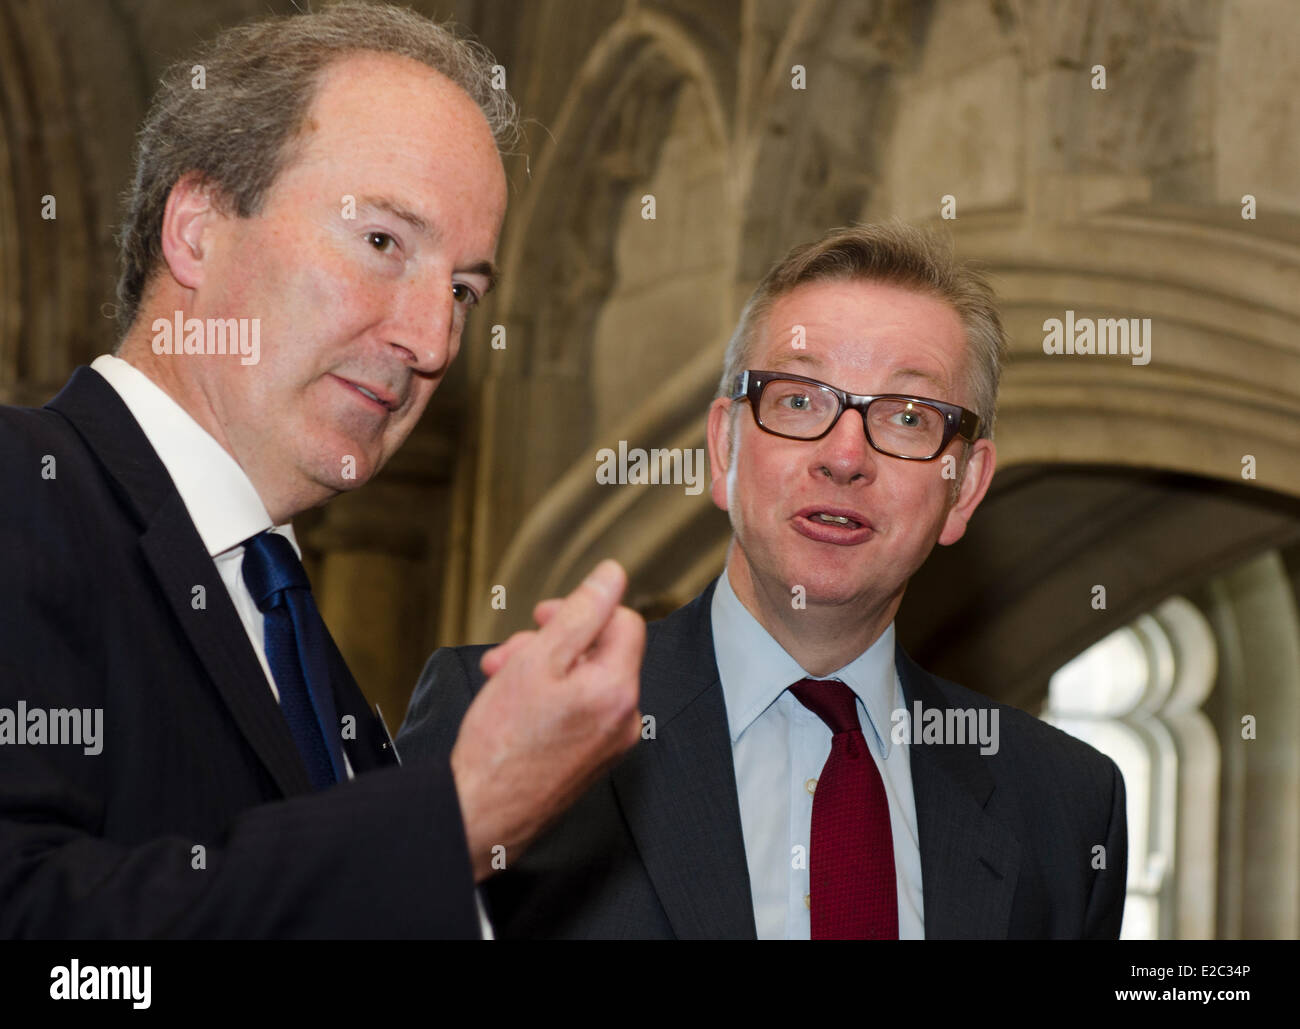 London, UK. 18th June, 2014. Charles Moore Former editor of The Telegraph, Mrs Thatcher's biographer with Michael Gove Education Secretary speakers at the Margaret Thatcher Conference on Liberty 2014 , Guildhall, London, UK Credit:  Prixnews/Alamy Live News Stock Photo